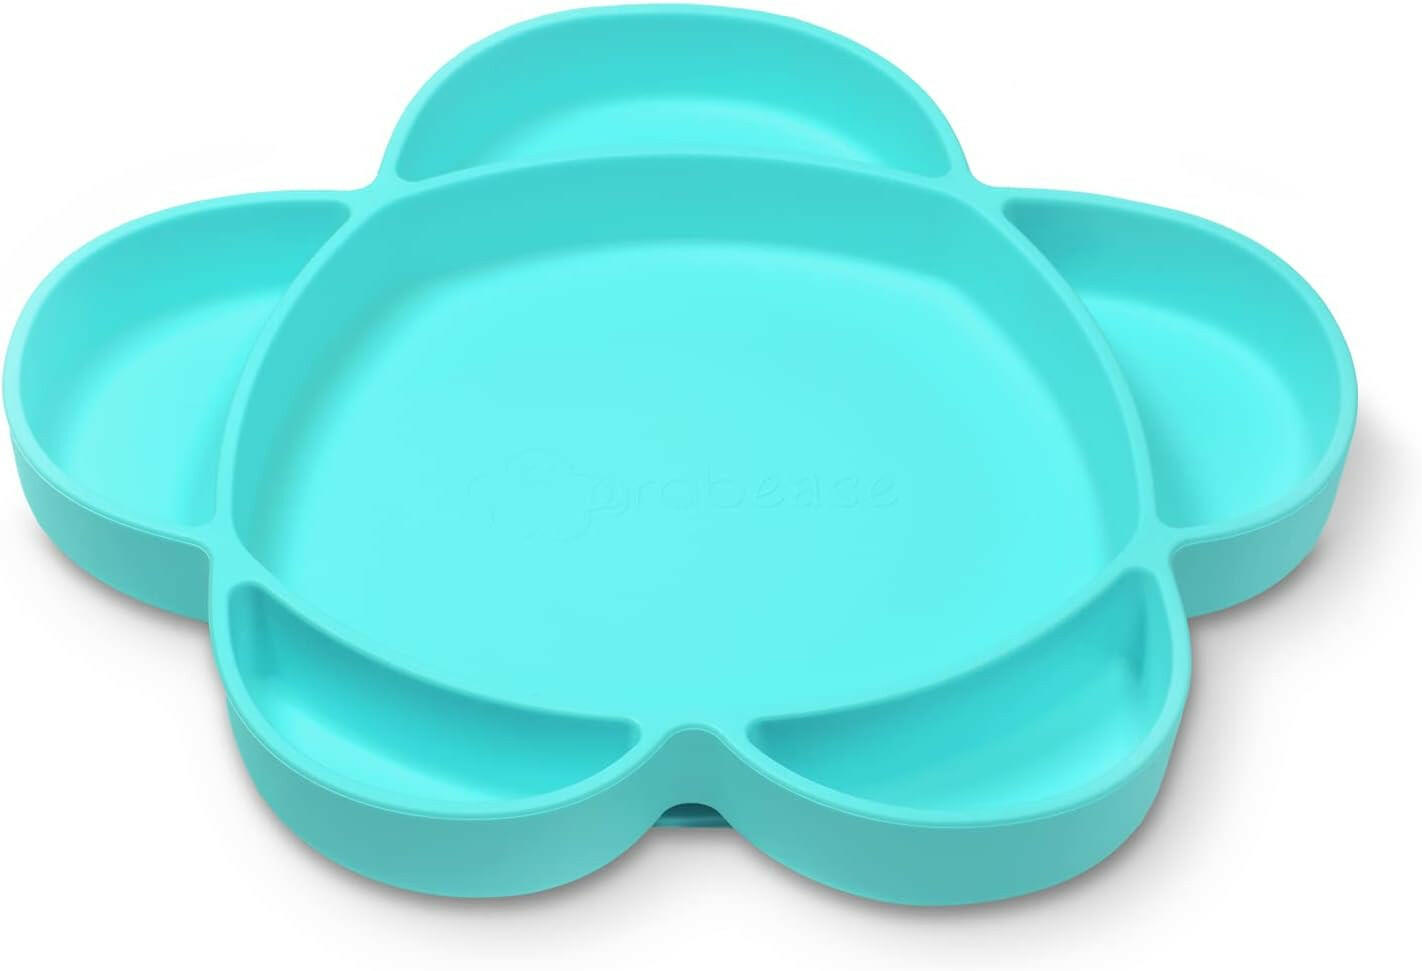 Grabease Silicone Suction Plate for Baby & Toddler Self-Feeding, 6-Section Dish With Stay-Put Grip, BPA and Phthalates-Free, Dishwasher and Microwave Safe